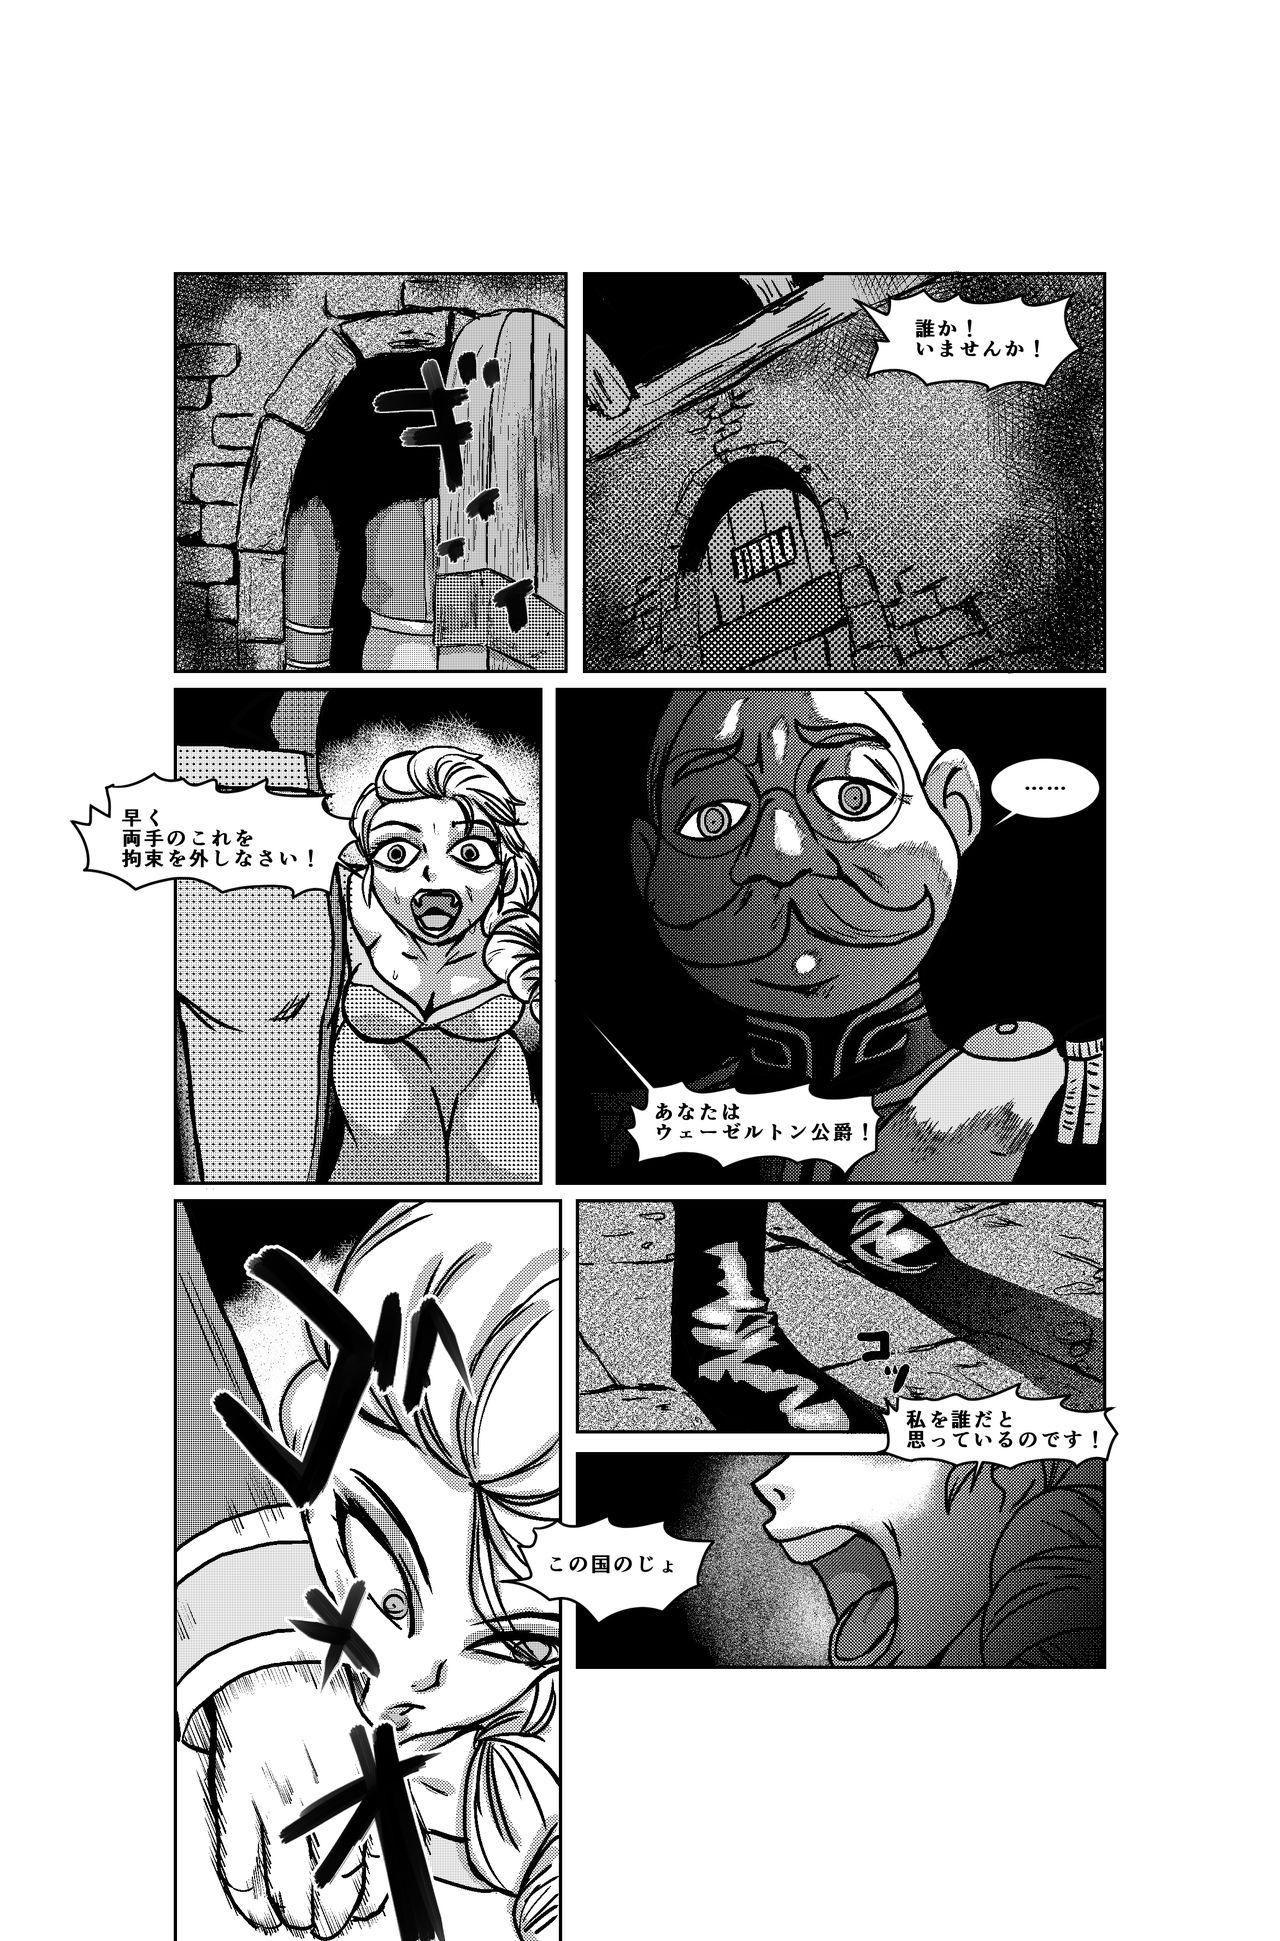 Sislovesme Queen of Snow the beginning - Frozen Babe - Page 3